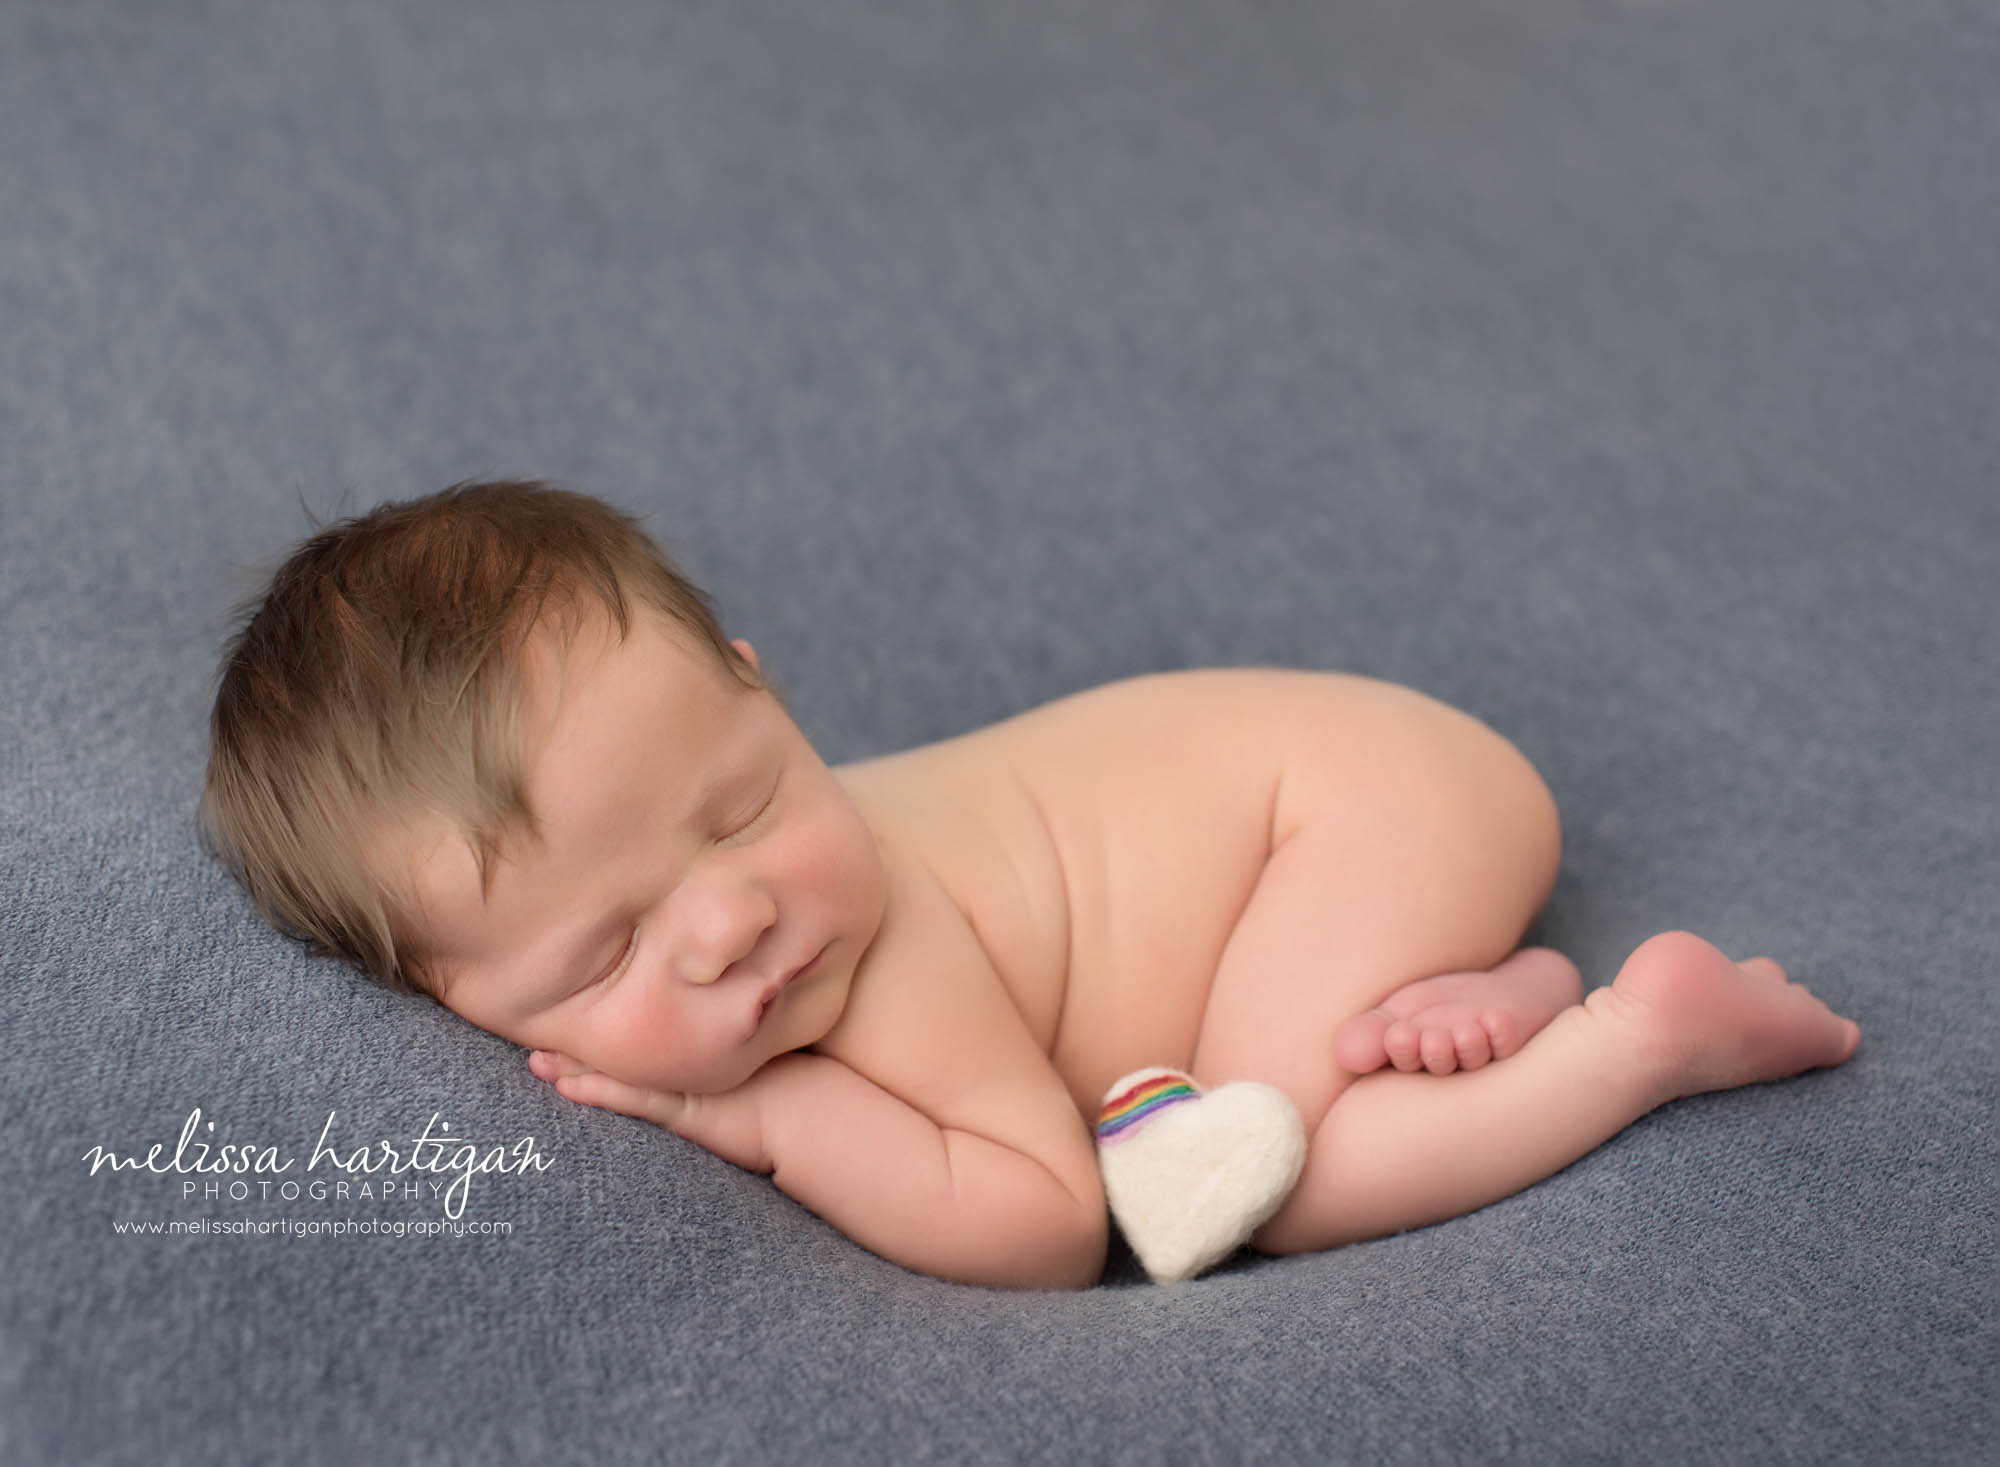 newborn baby boy posed on tummy with white felted heart with rainbow